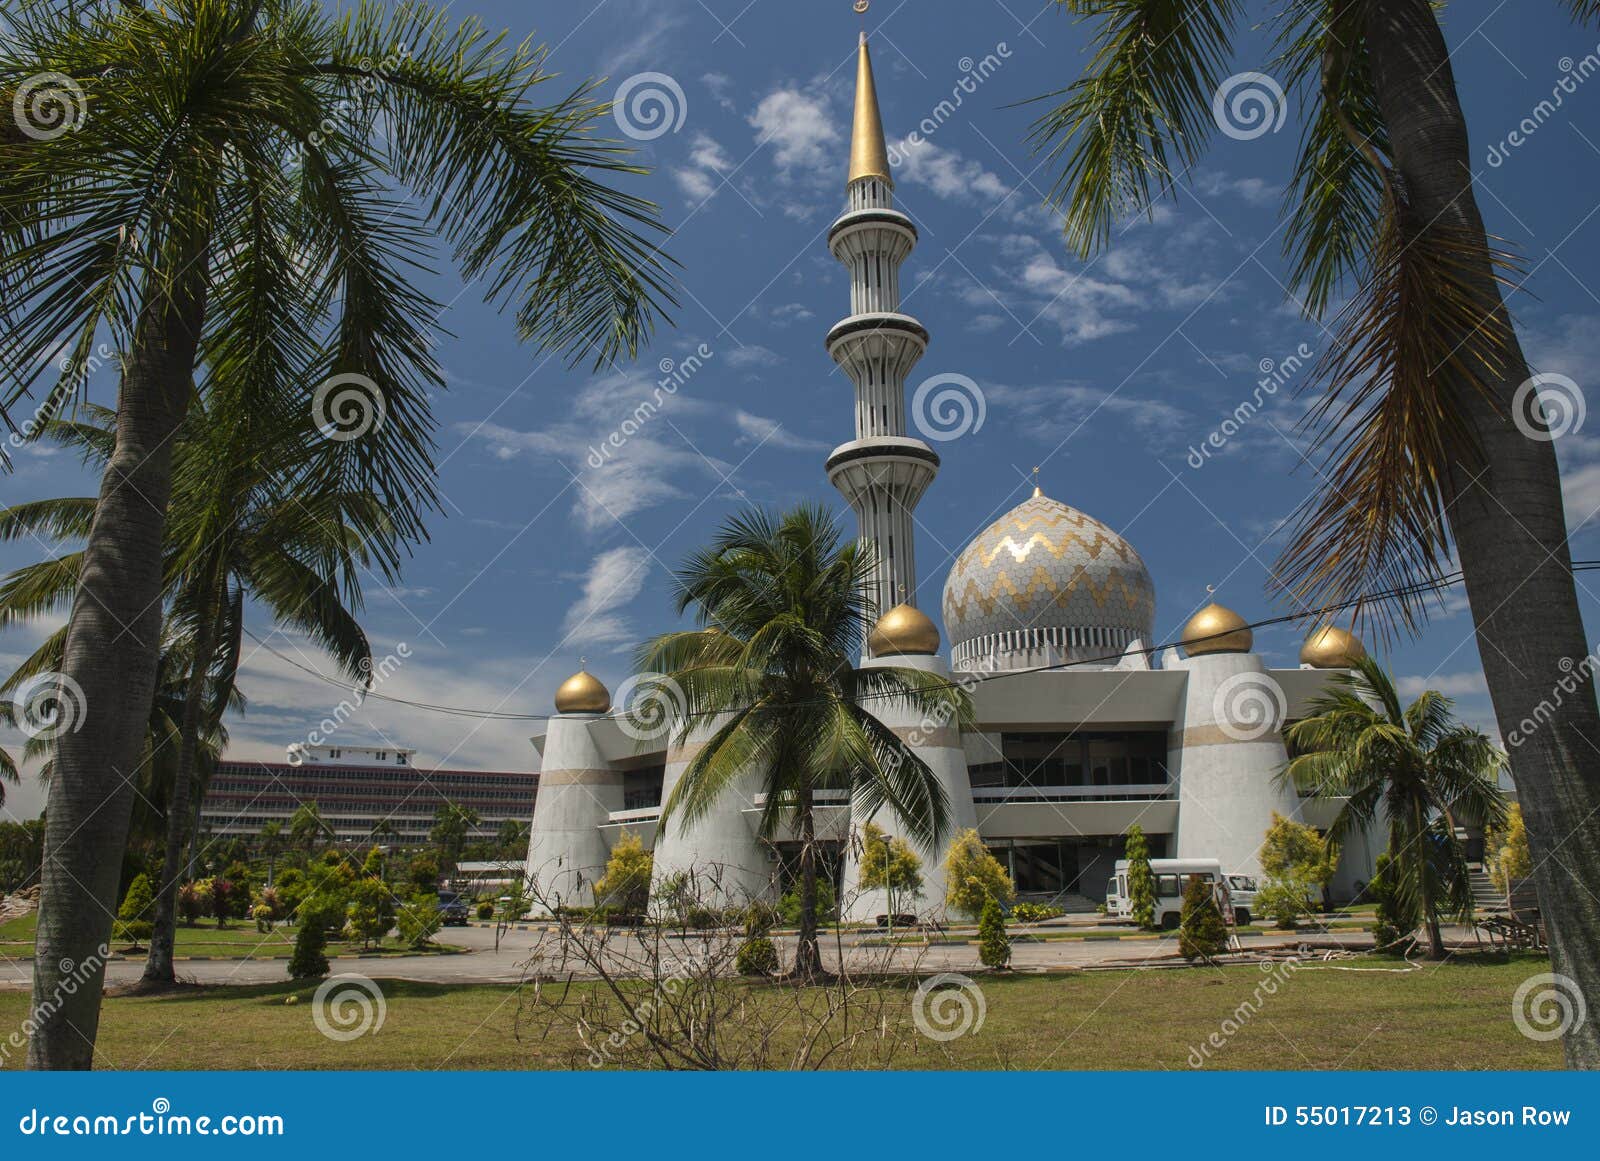 dome and minarets of sabah state mosque in kota kinabalu